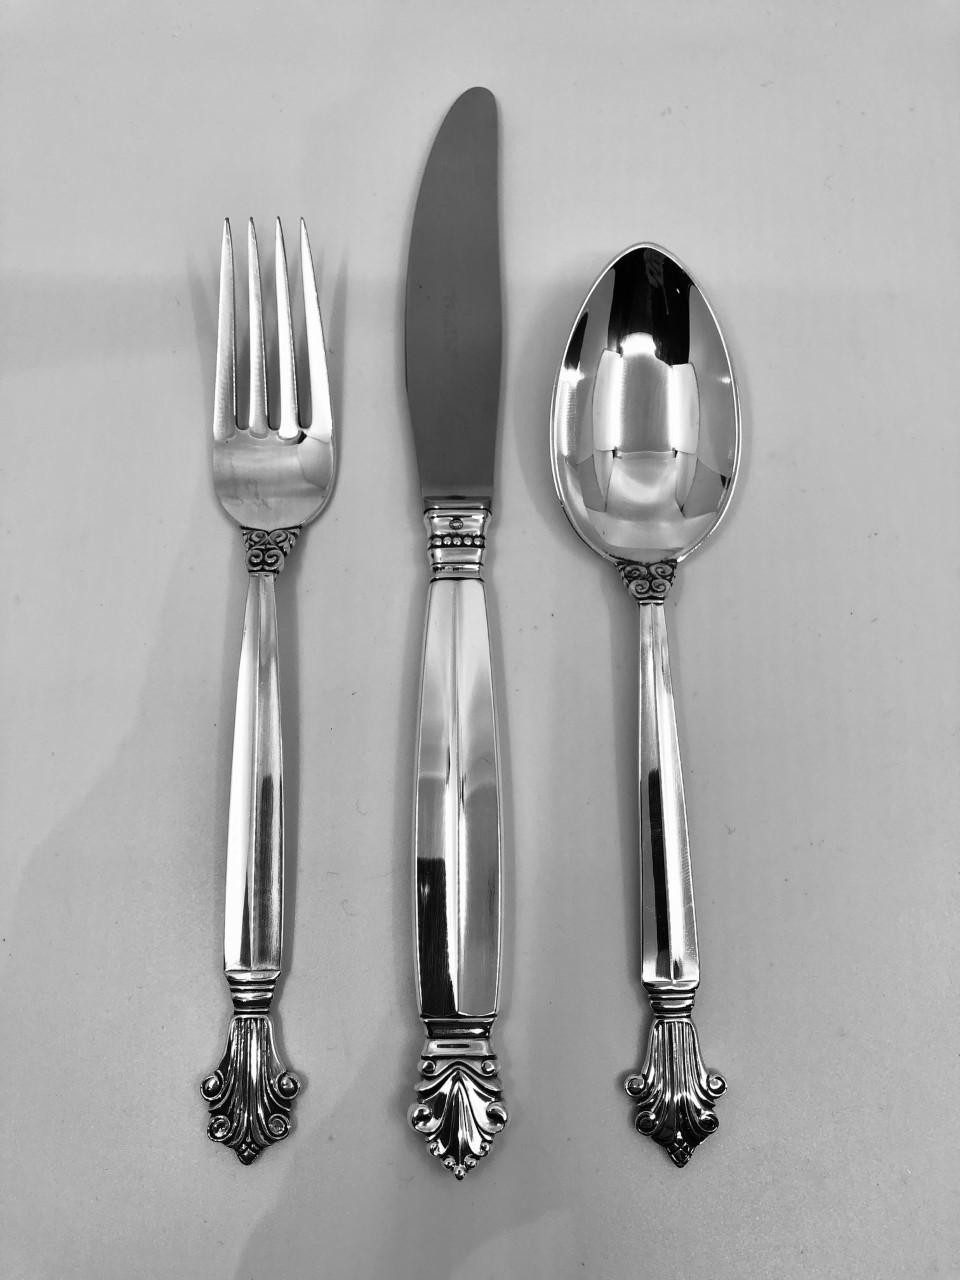 This is a set of Georg Jensen sterling silverware in the Acanthus pattern, design by Johan Rohde from 1917. Acanthus is the sister pattern to Johan Rohde's famous Acorn silverware; The original Danish name for Acorn is 